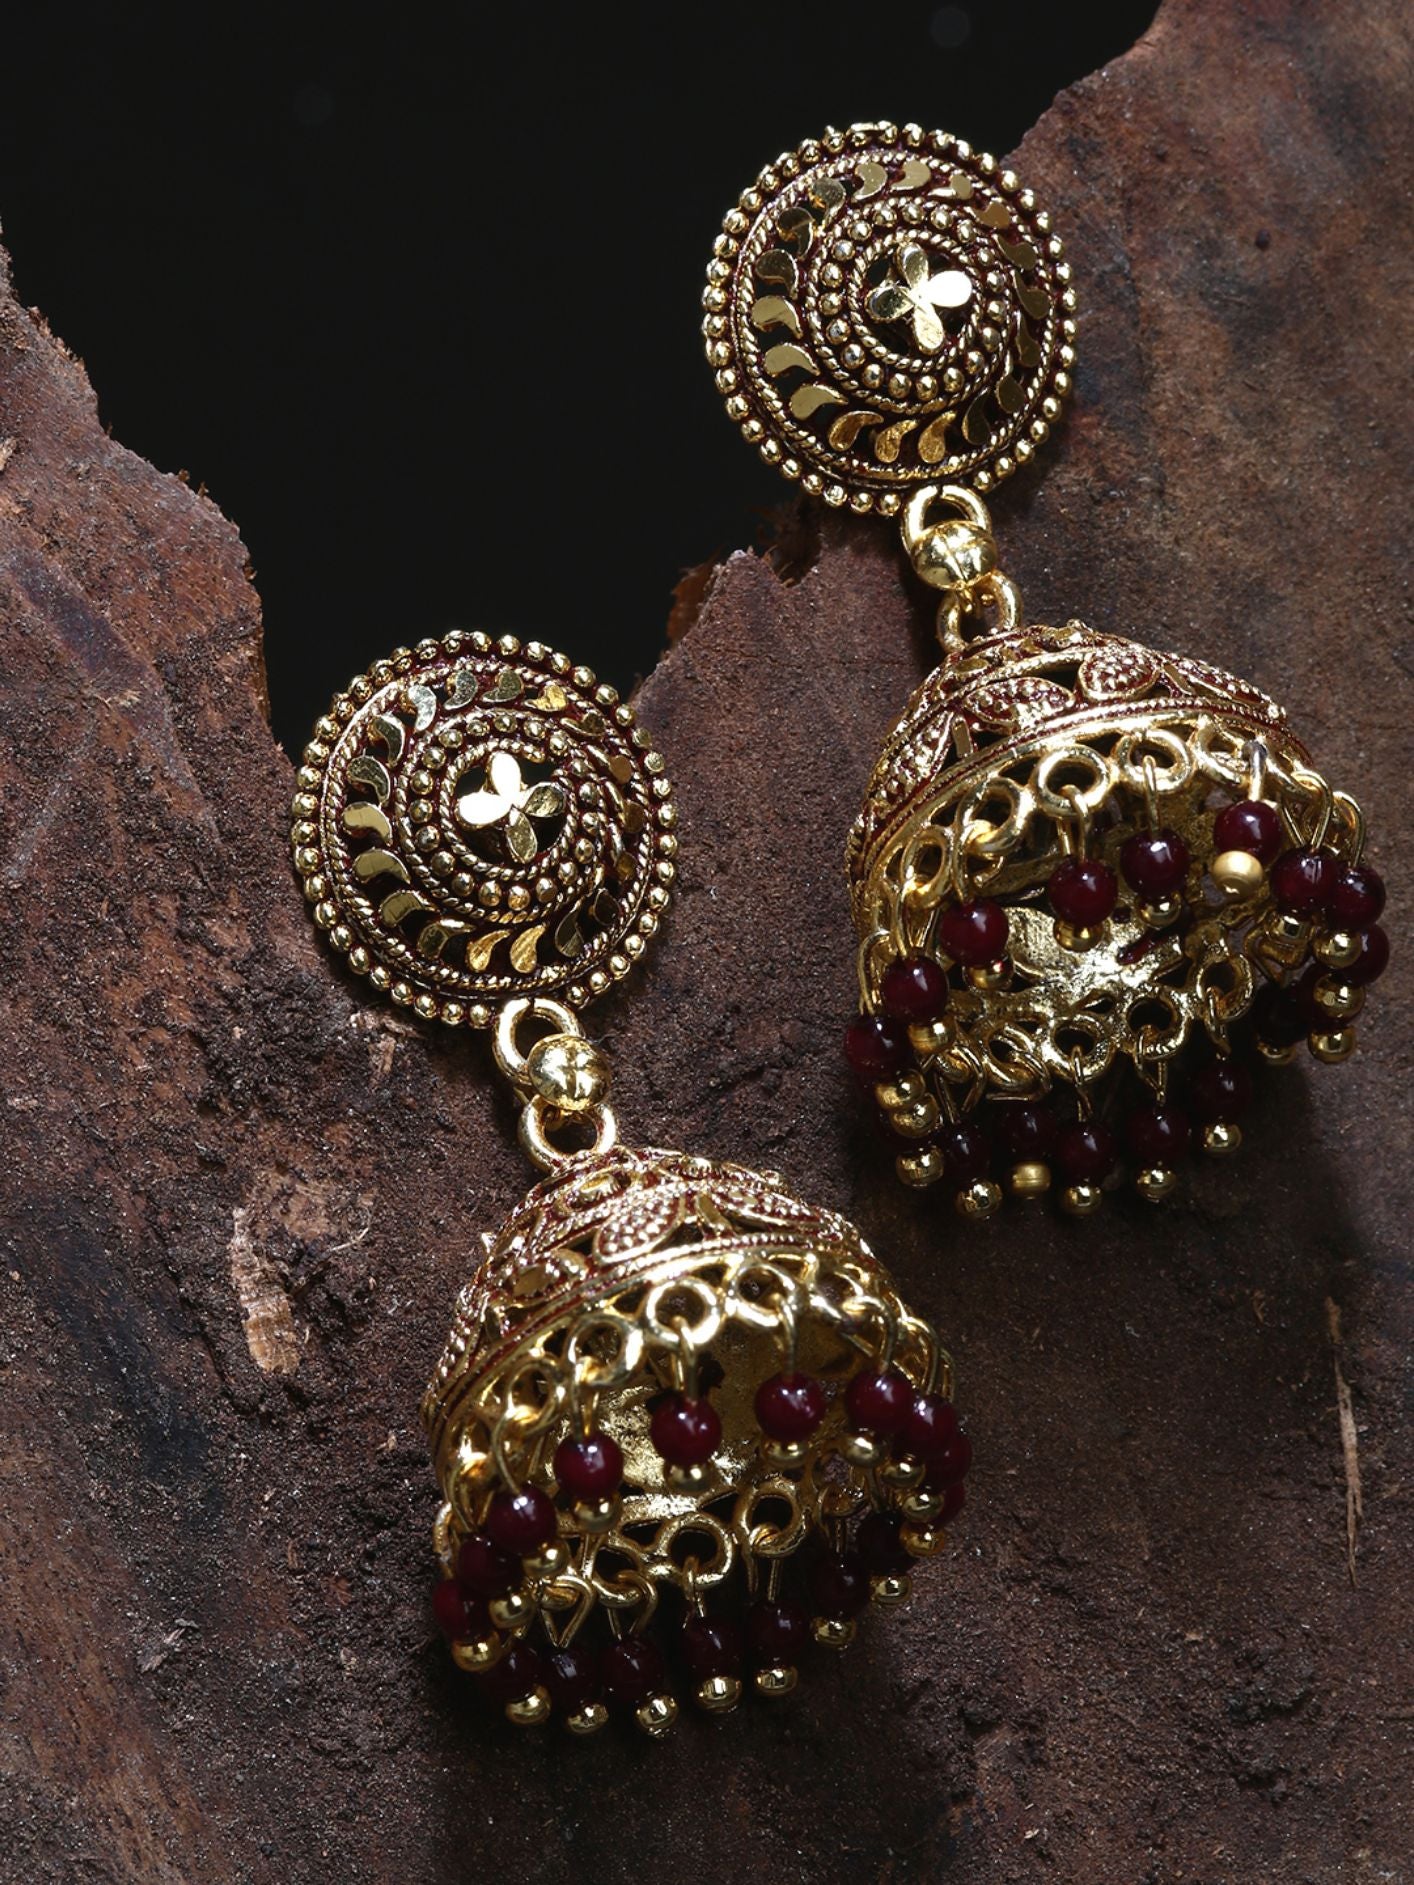 Women's Maroon & Gold-Plated Enamelled Dome Shaped Jhumkas - Anikas Creation